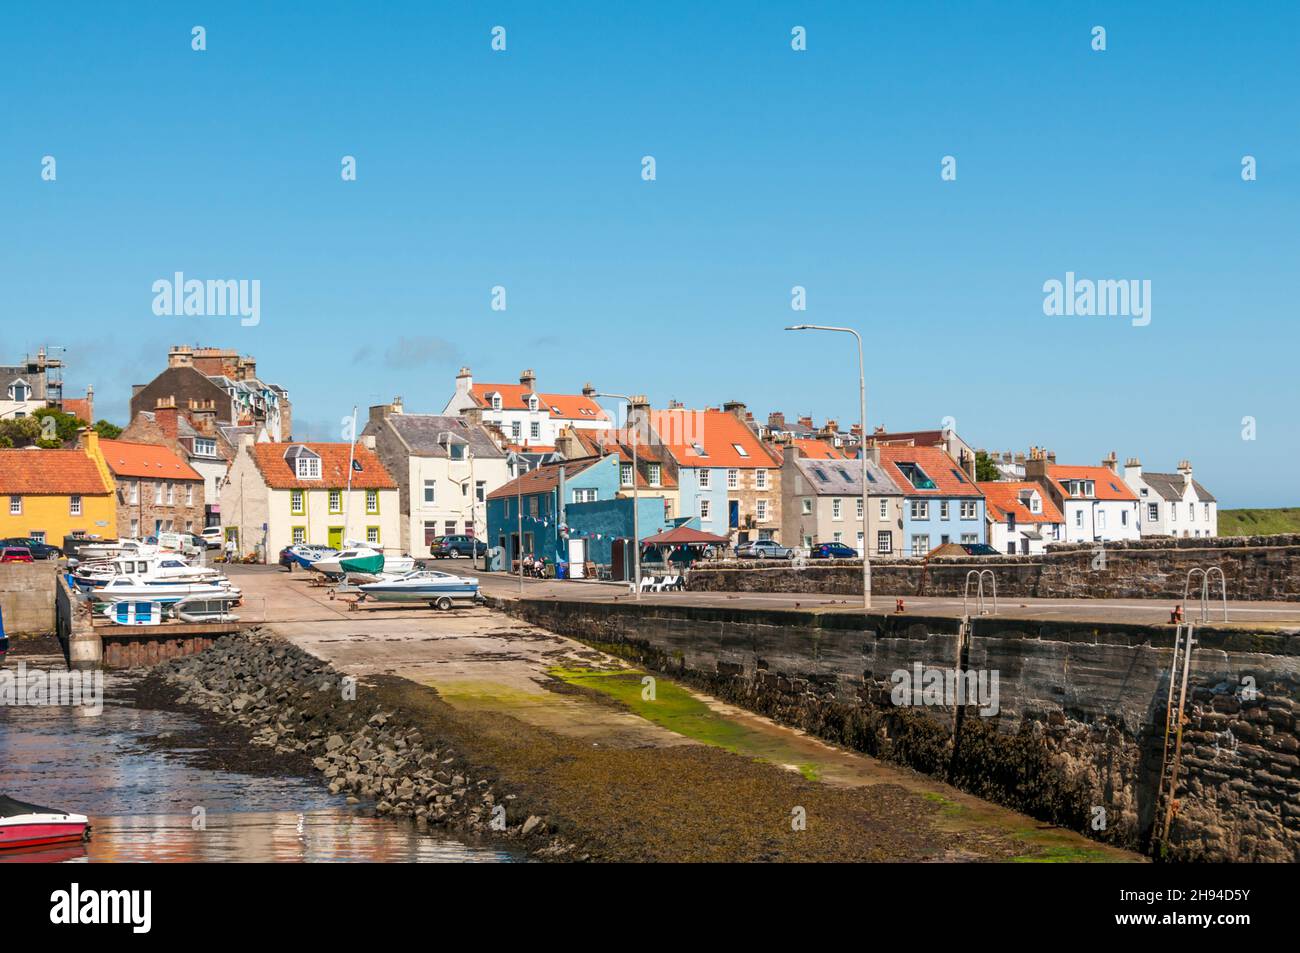 The East Pier and the East Pier Smokehouse at St Monans in the East Neuk of Fife, Scotland. Stock Photo